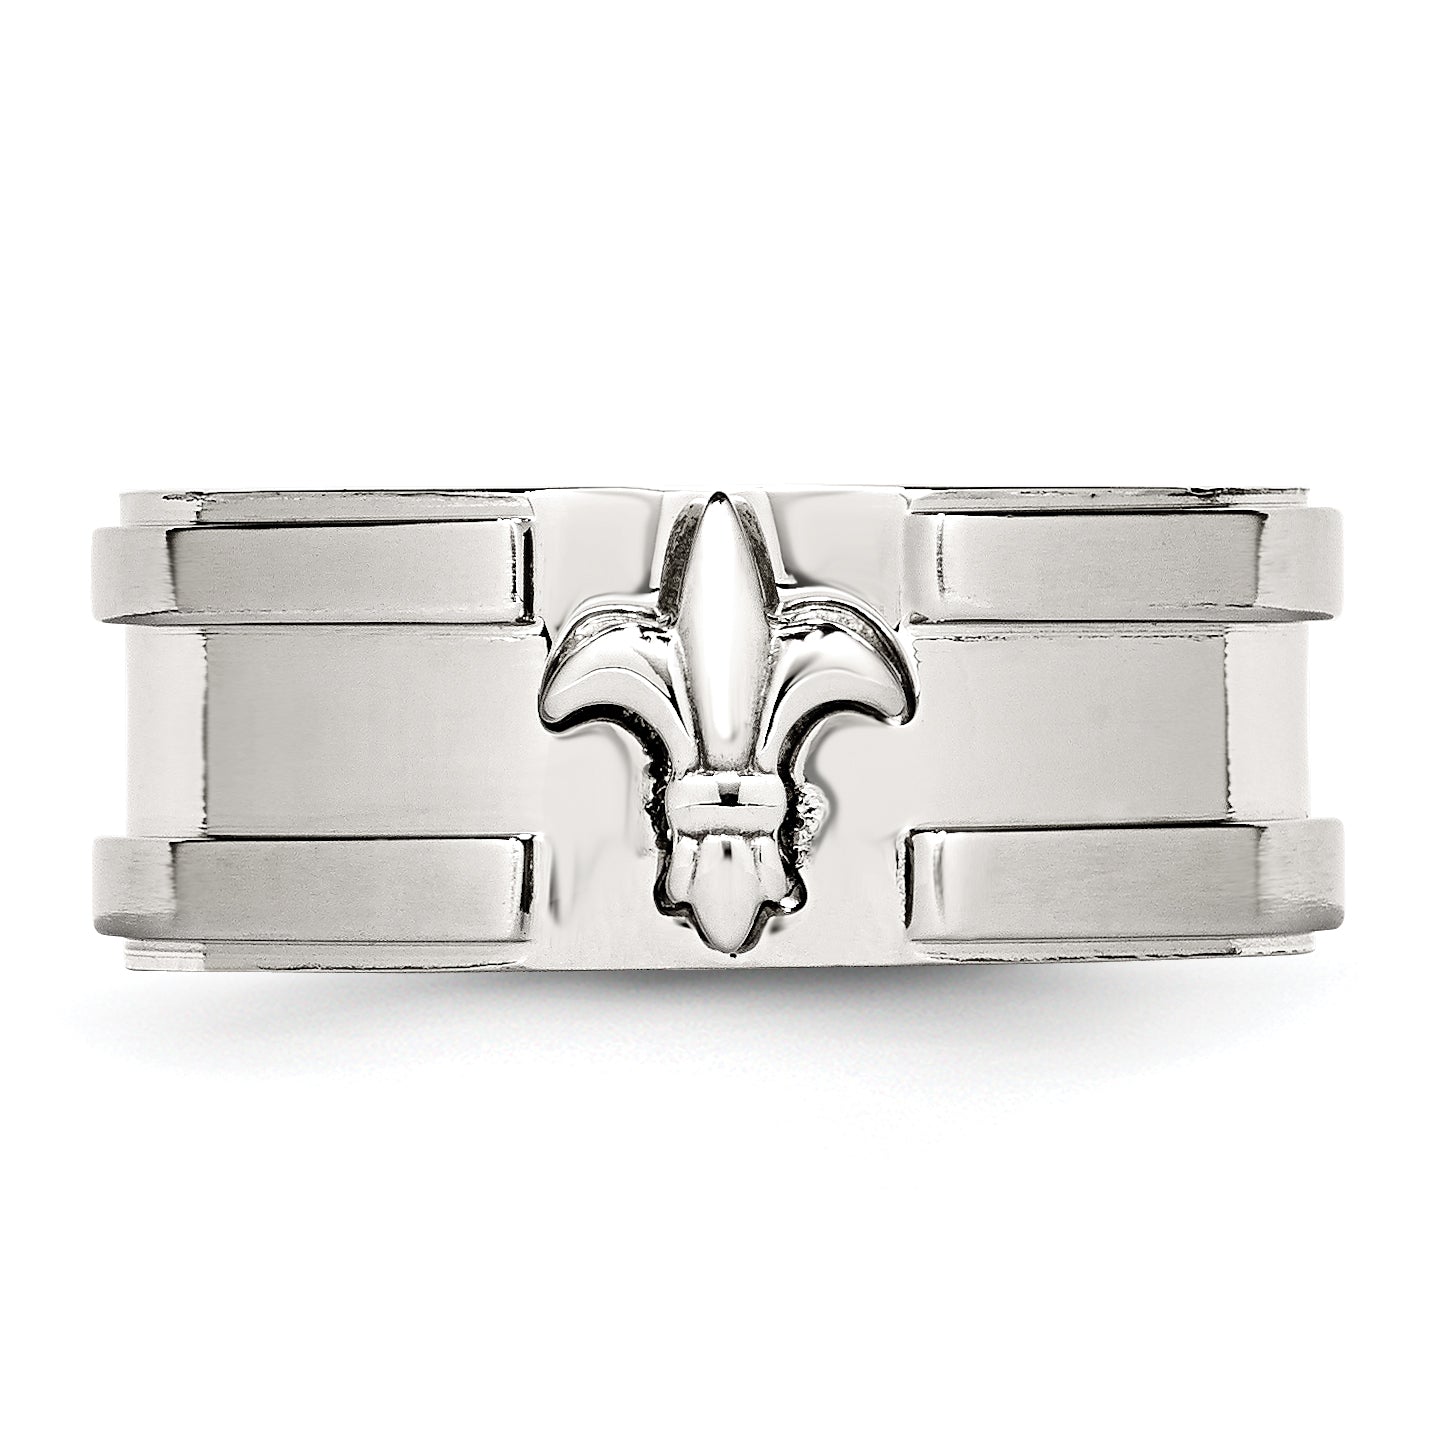 Stainless Steel Brushed and Polished Fleur de lis 10mm Band